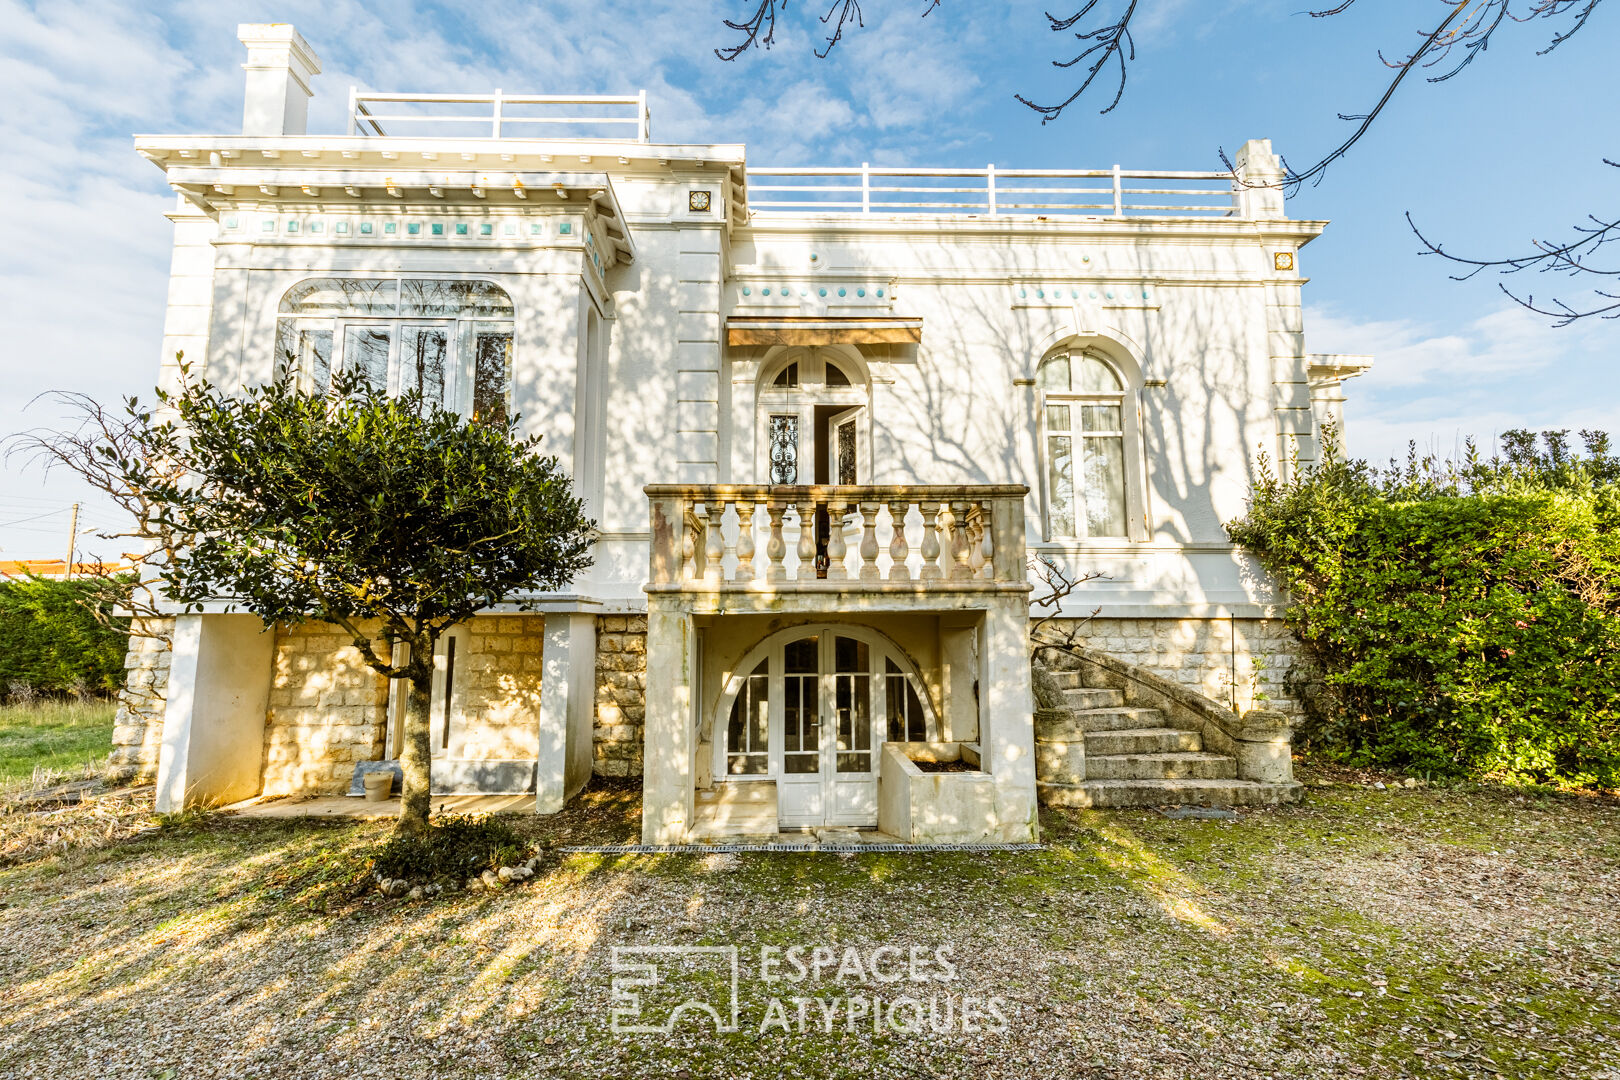 Late 19th century villa and its park close to the sea